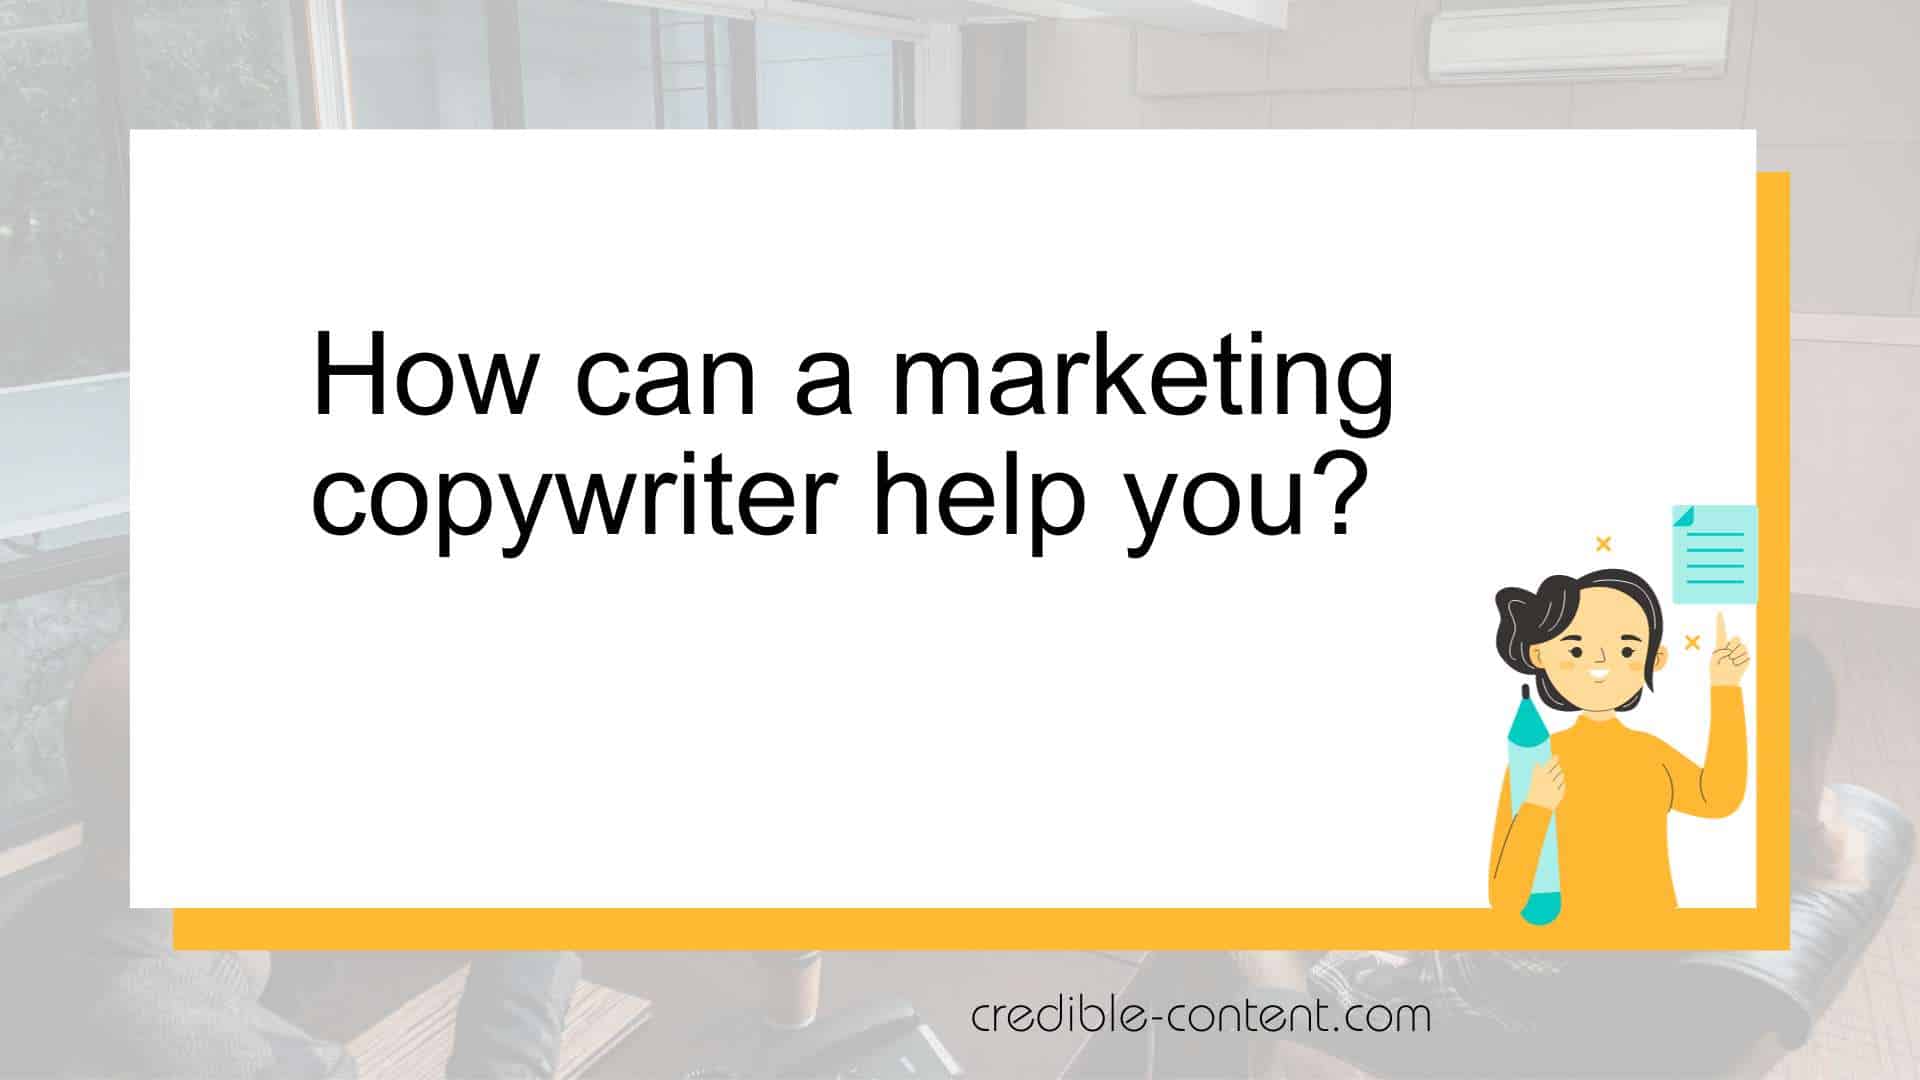 How can a marketing copywriter help you